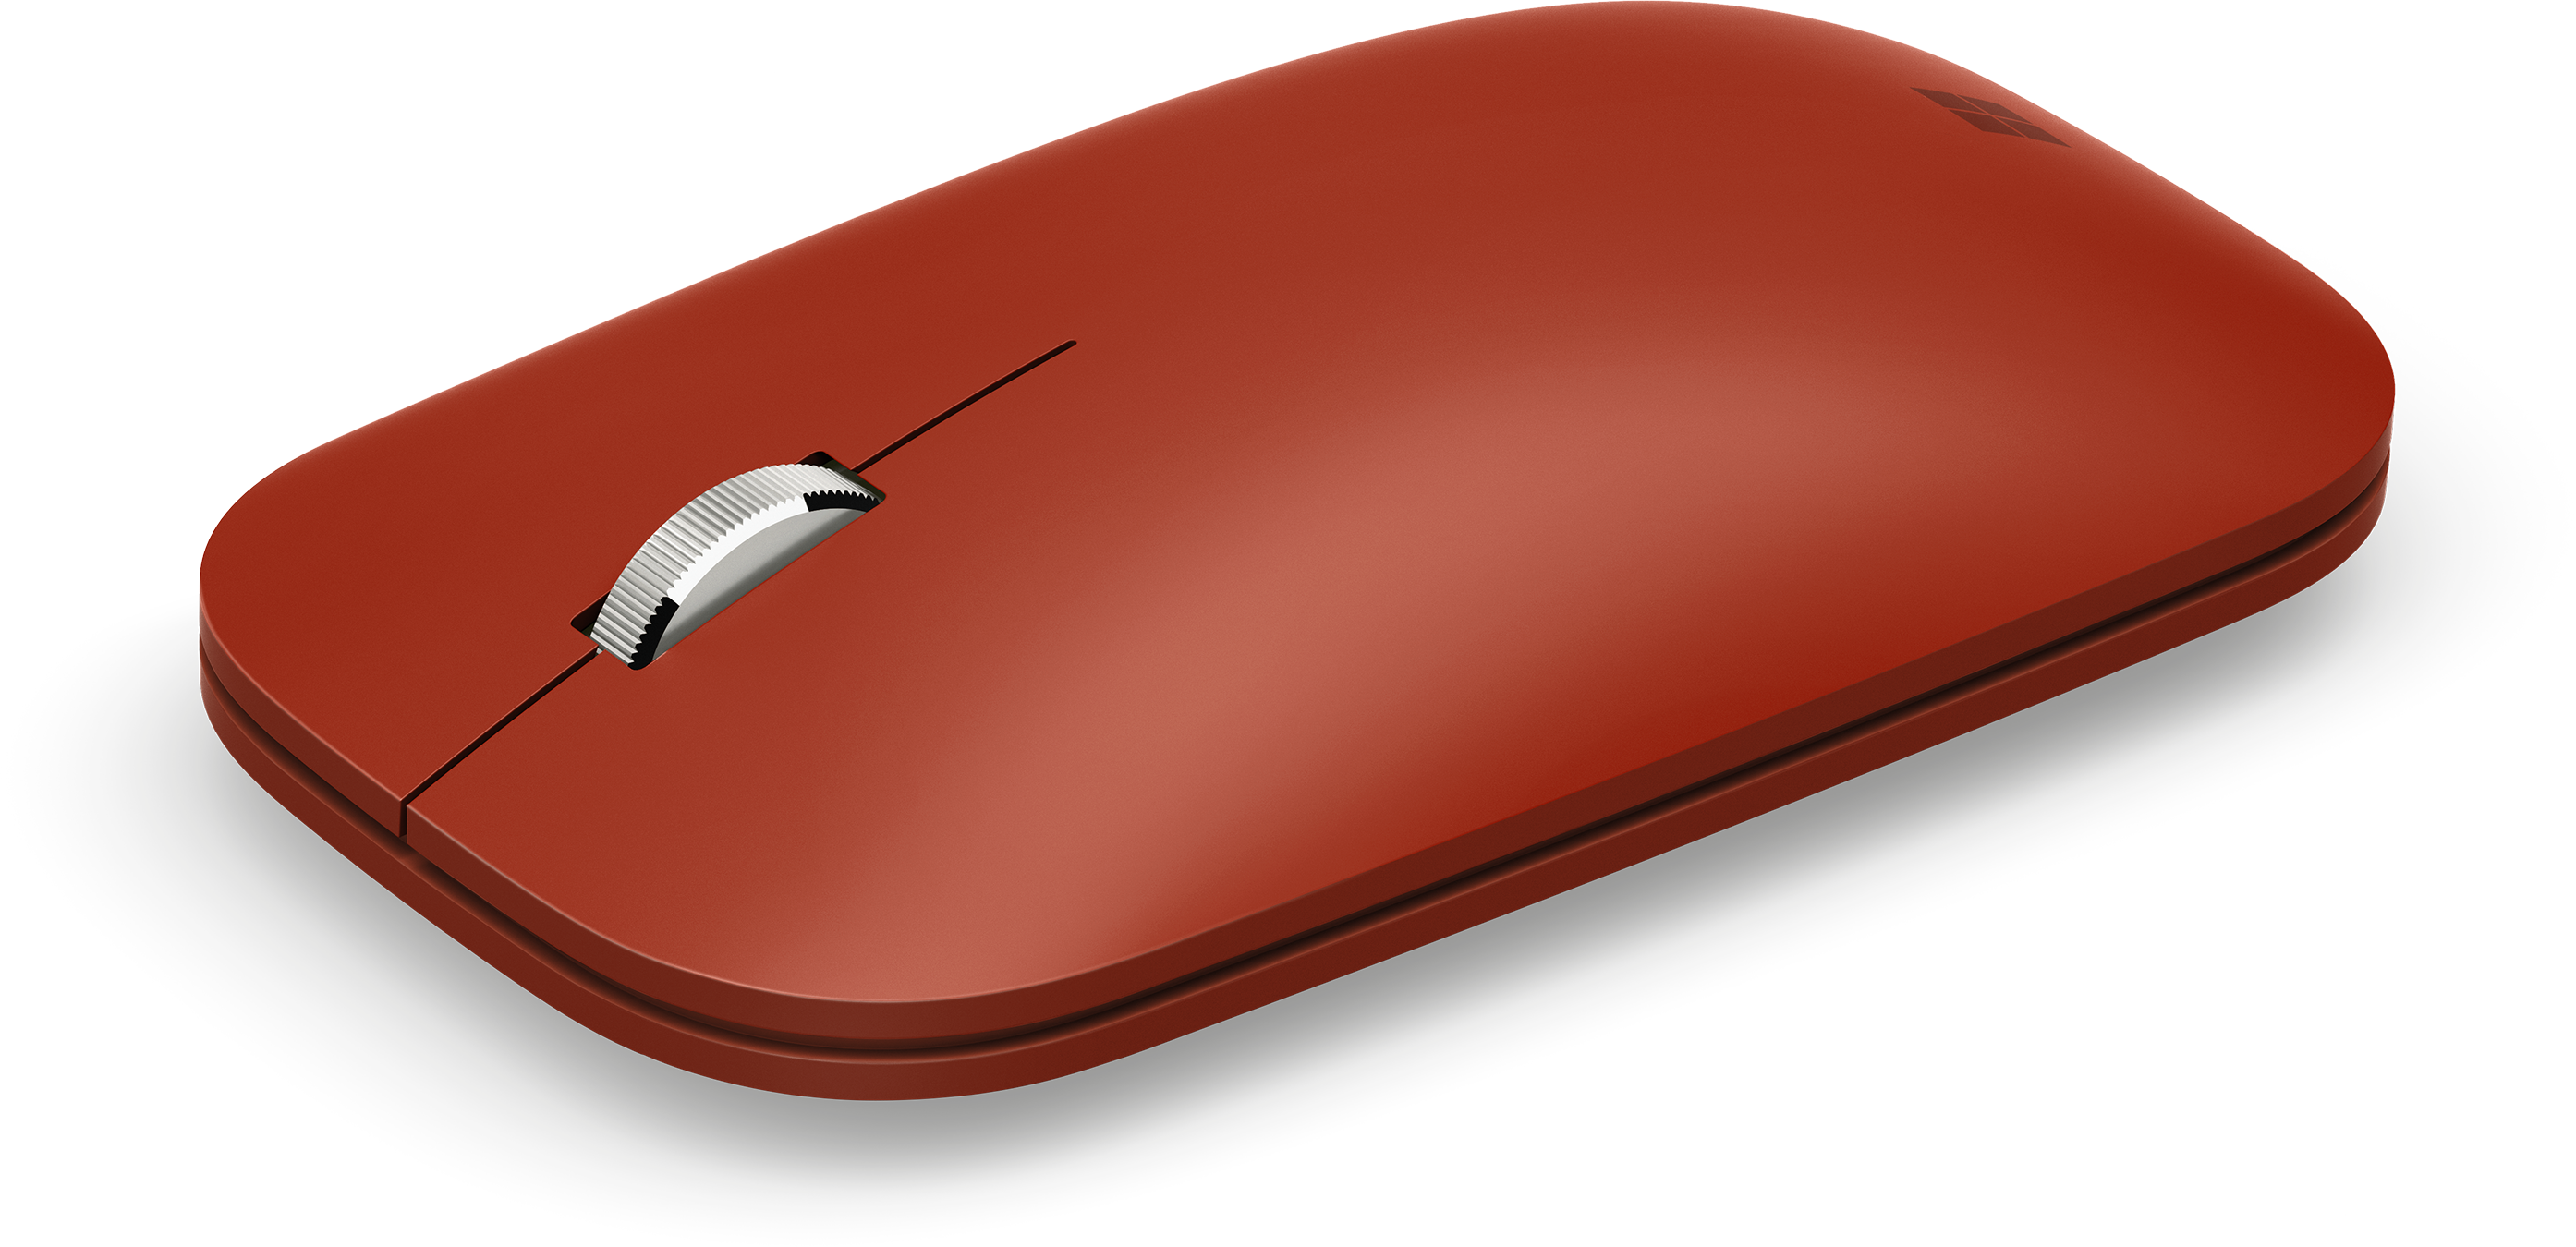 Buy Surface Mobile Mouse – Microsoft Surface